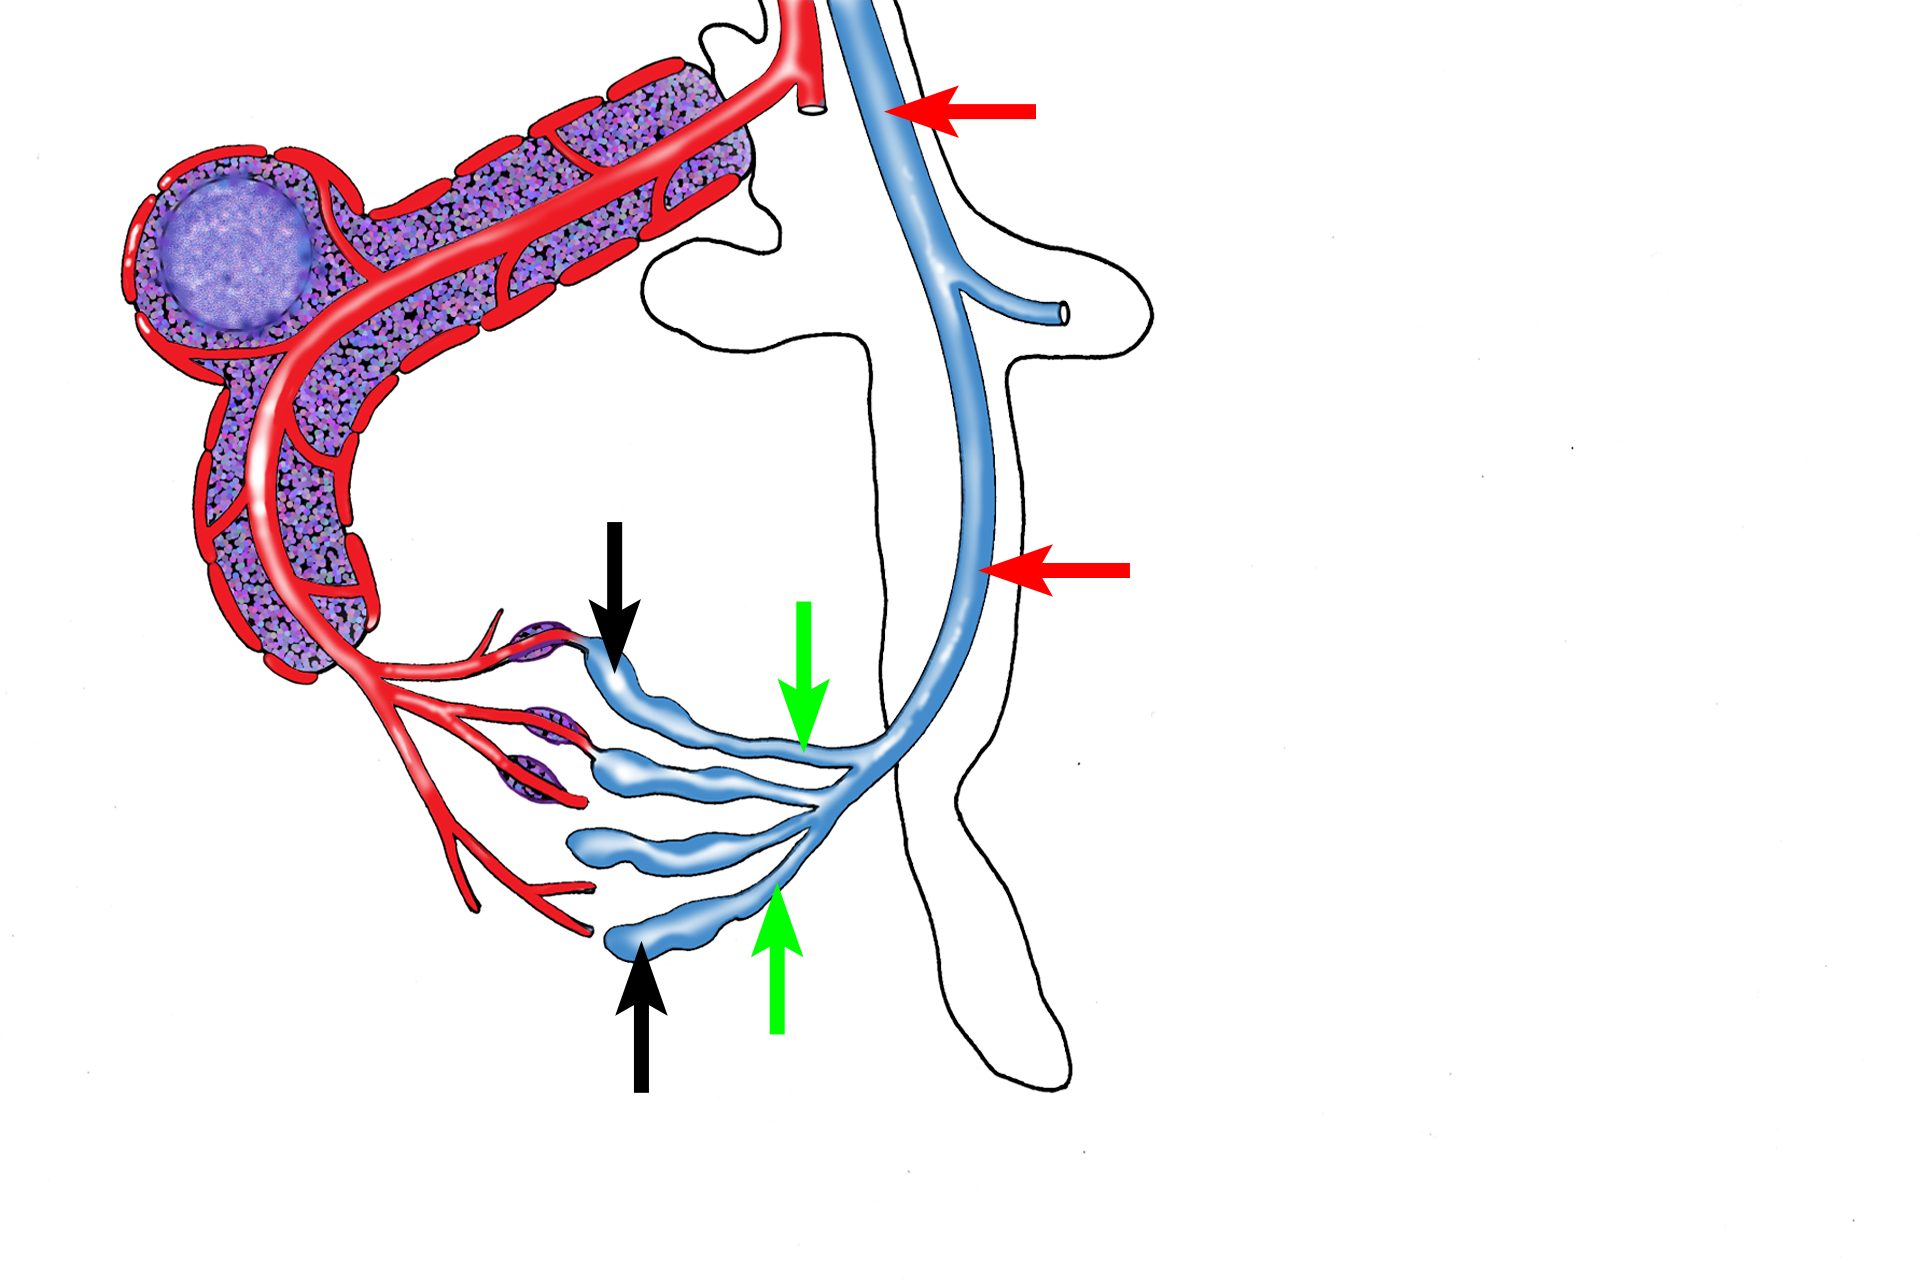 Venous drainage > <p>Splenic sinuses (black arrows) anastomose to form splenic veins (green arrows) that enter the trabeculae as trabecular veins (red arrows).  Trabecular veins anastomose to form the splenic vein, which exits from the spleen at the hilum.</p>
